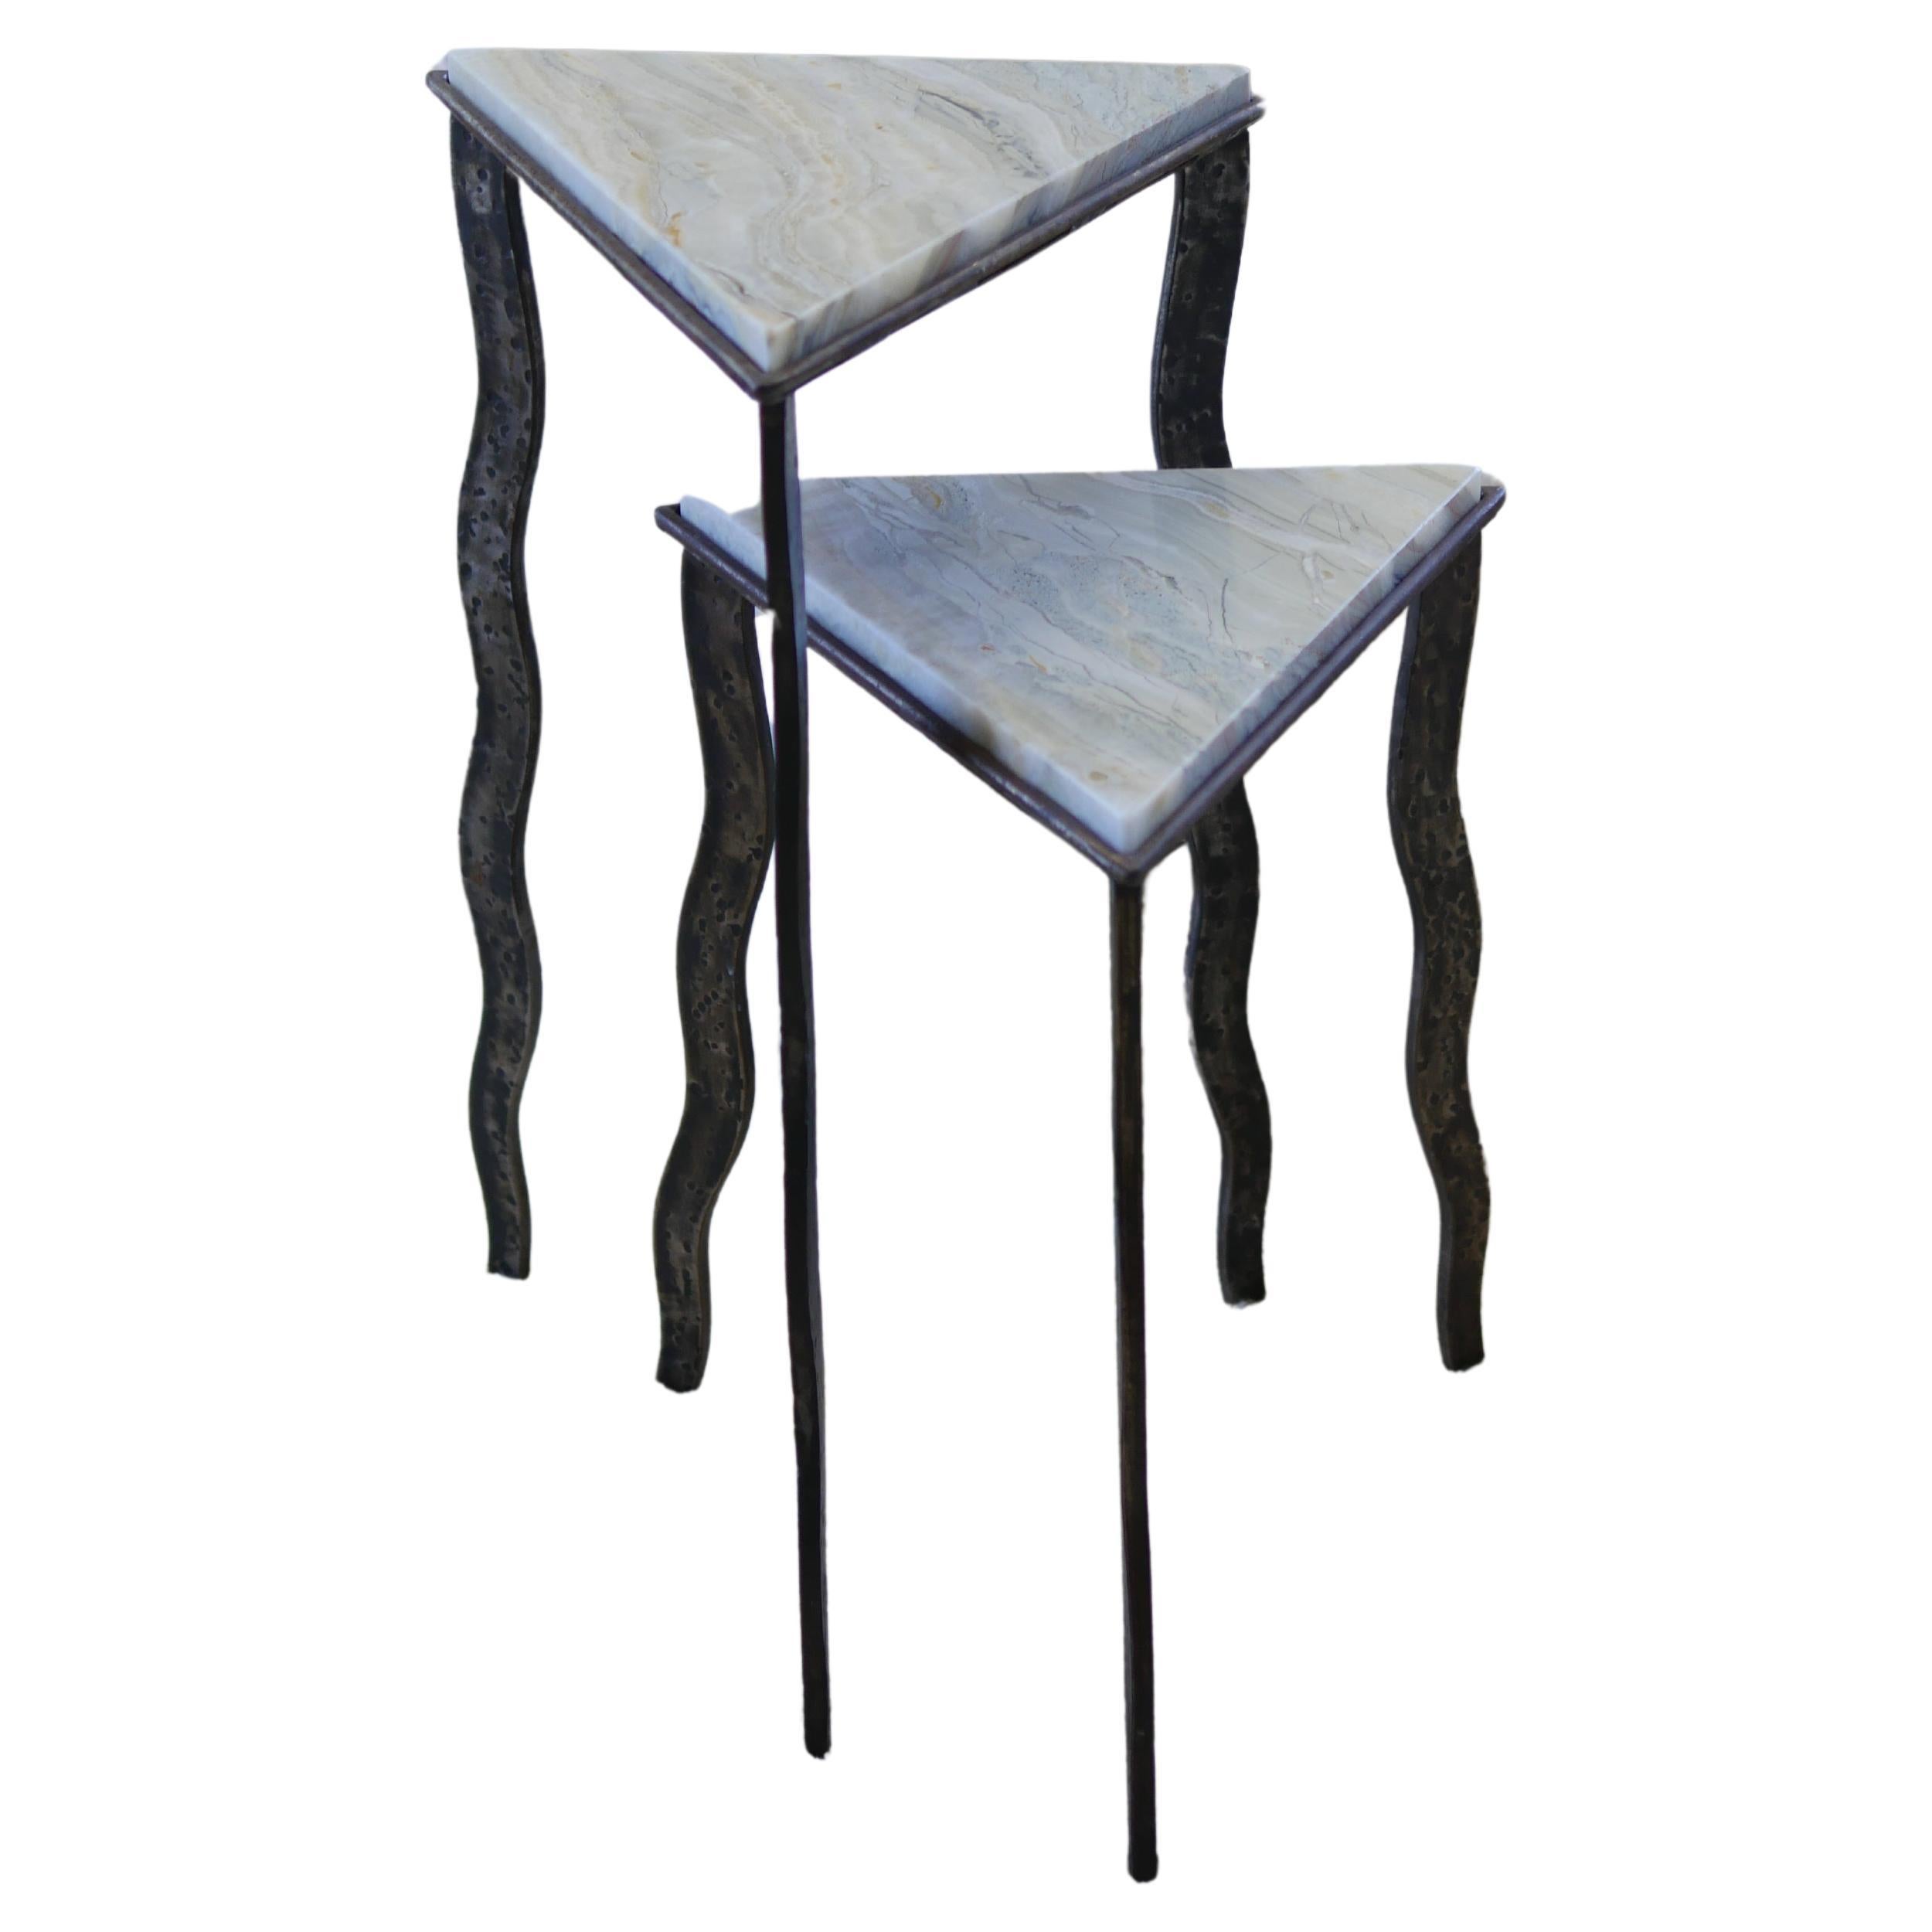 1980s Onyx and Iron Postmodern Artisan Side Tables - Set of 2 For Sale